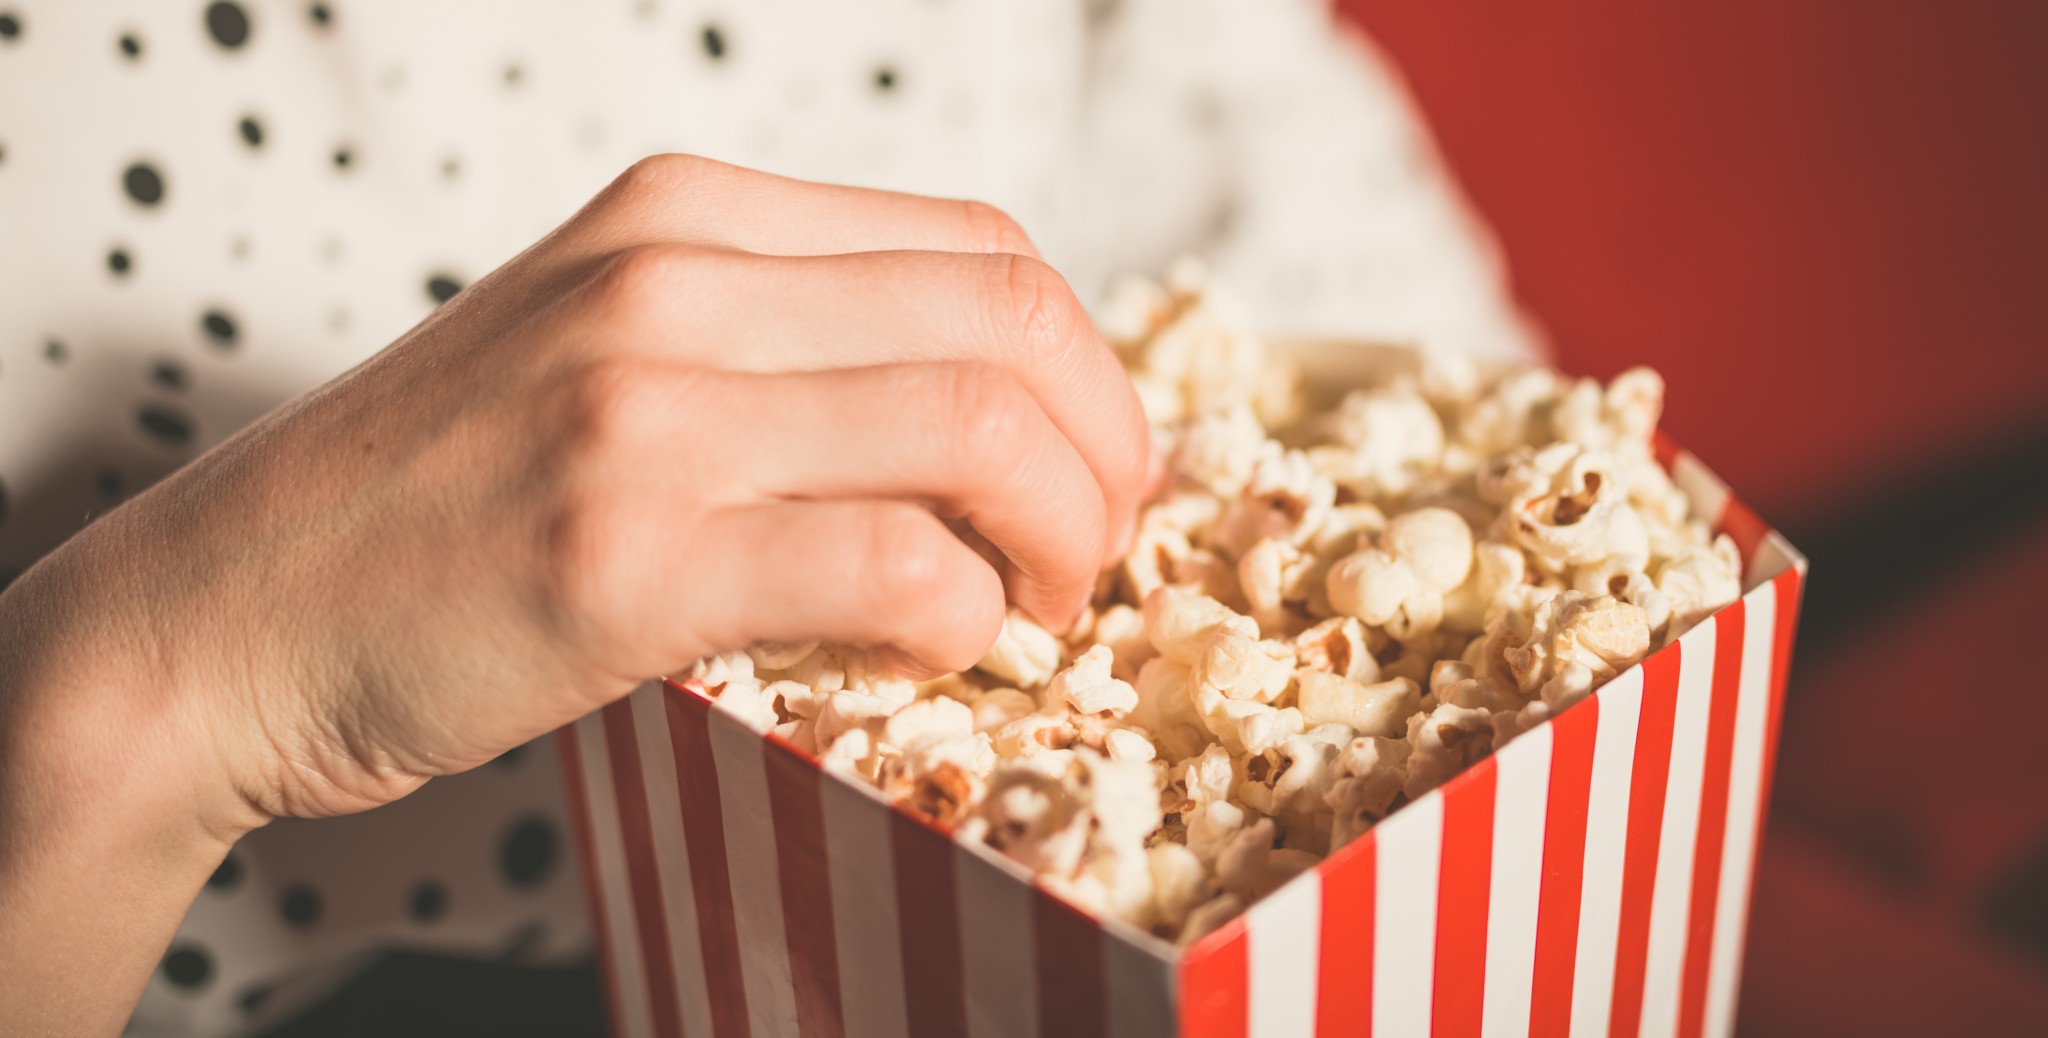 The Movie Theater Subscription Service Sinemia is Shutting Down In The US